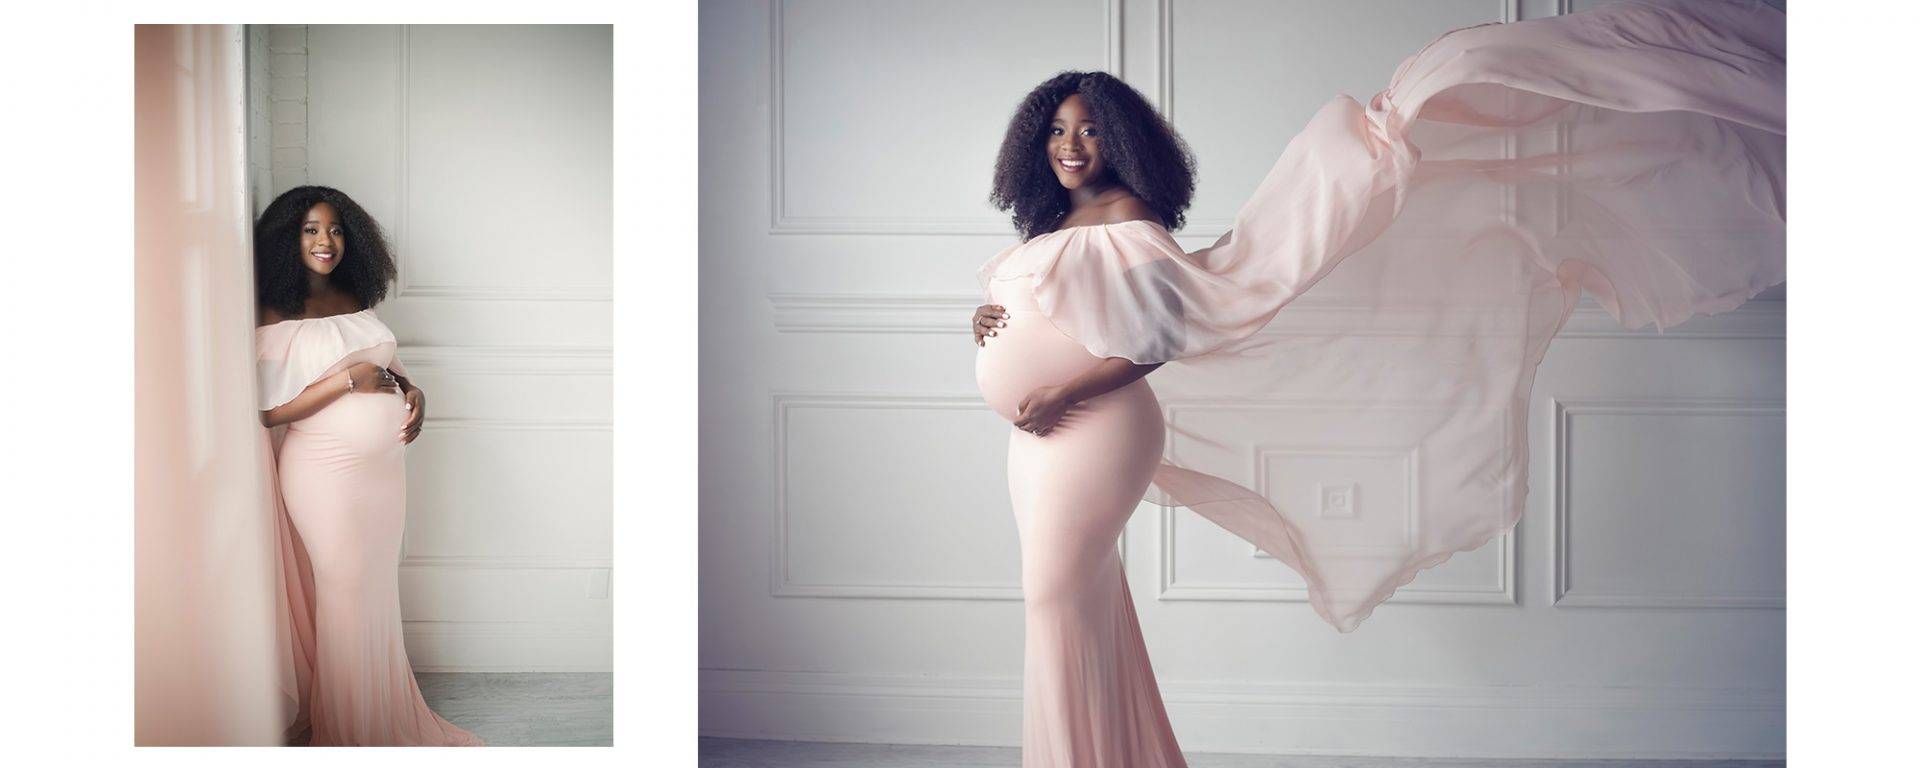 Dreamy maternity session for a lady wearing a pink dress.